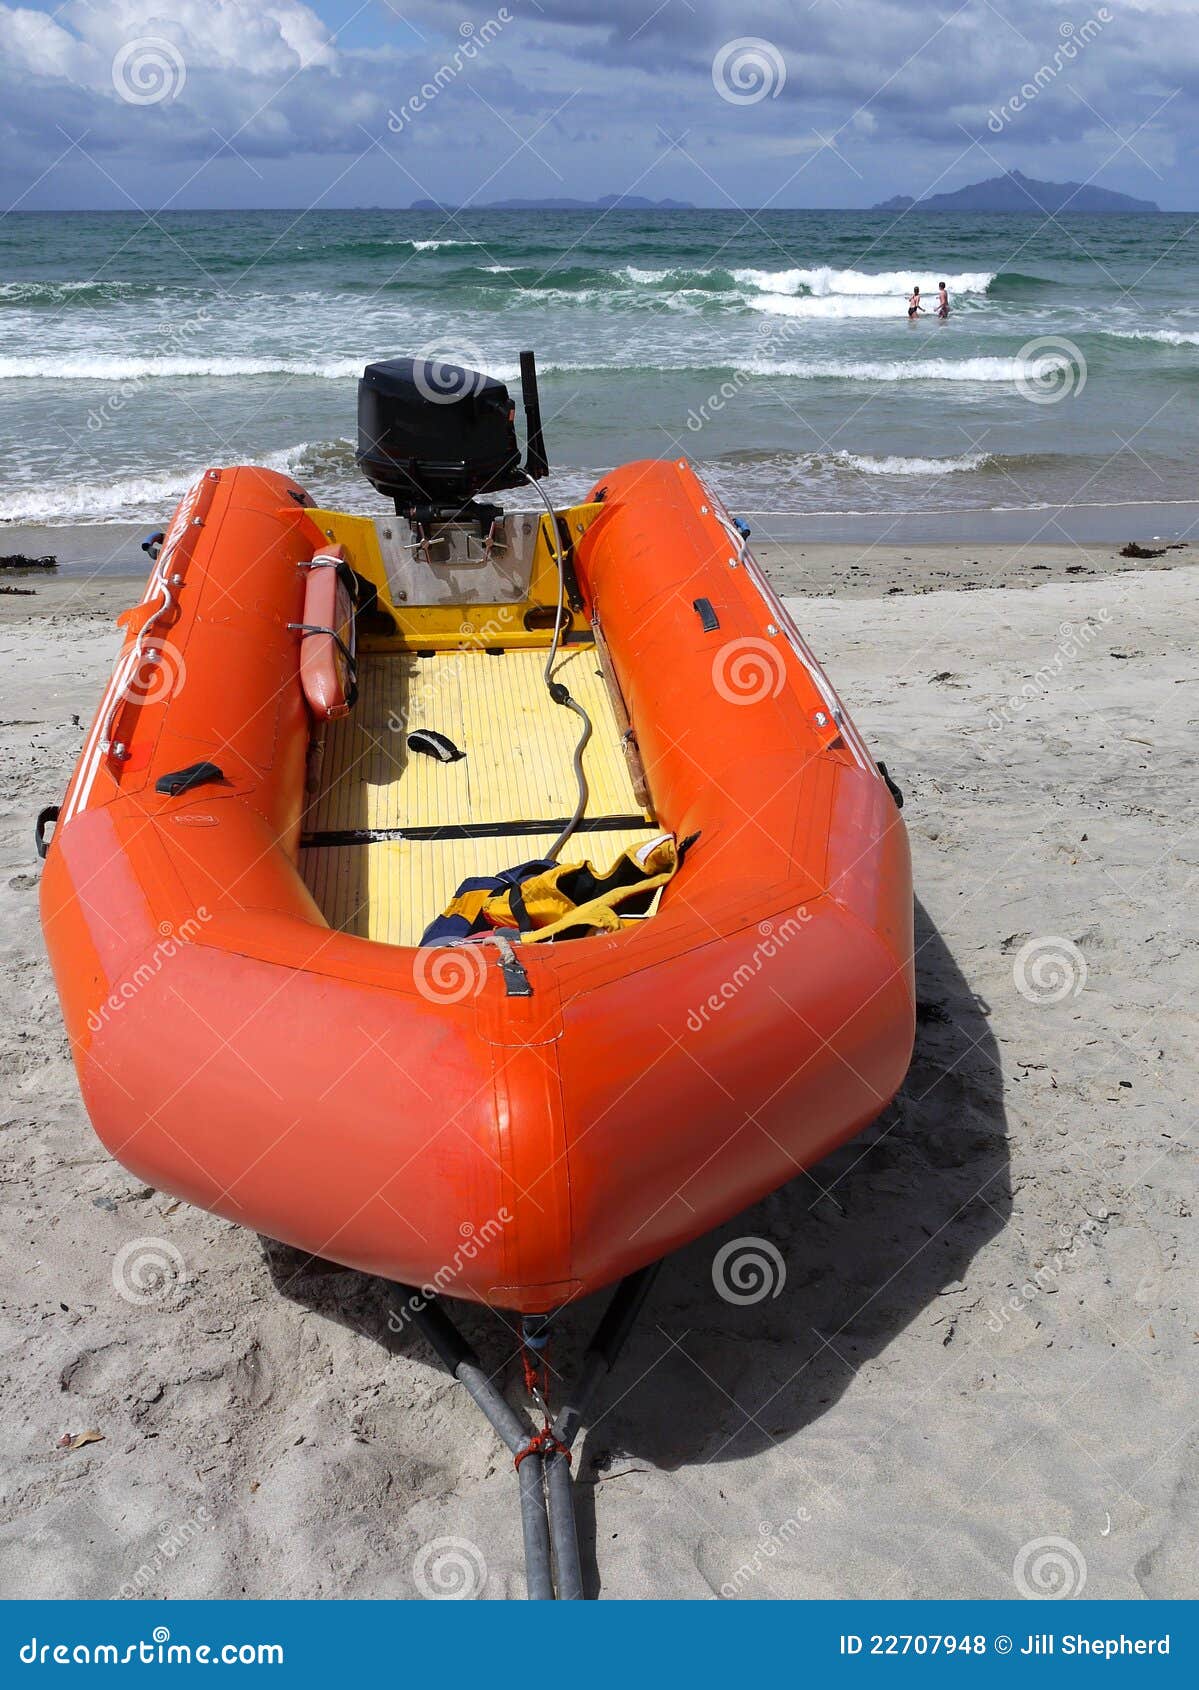 Beach: Surf Life-saving Inflatable and Swimmers Stock Photo - Image of ...